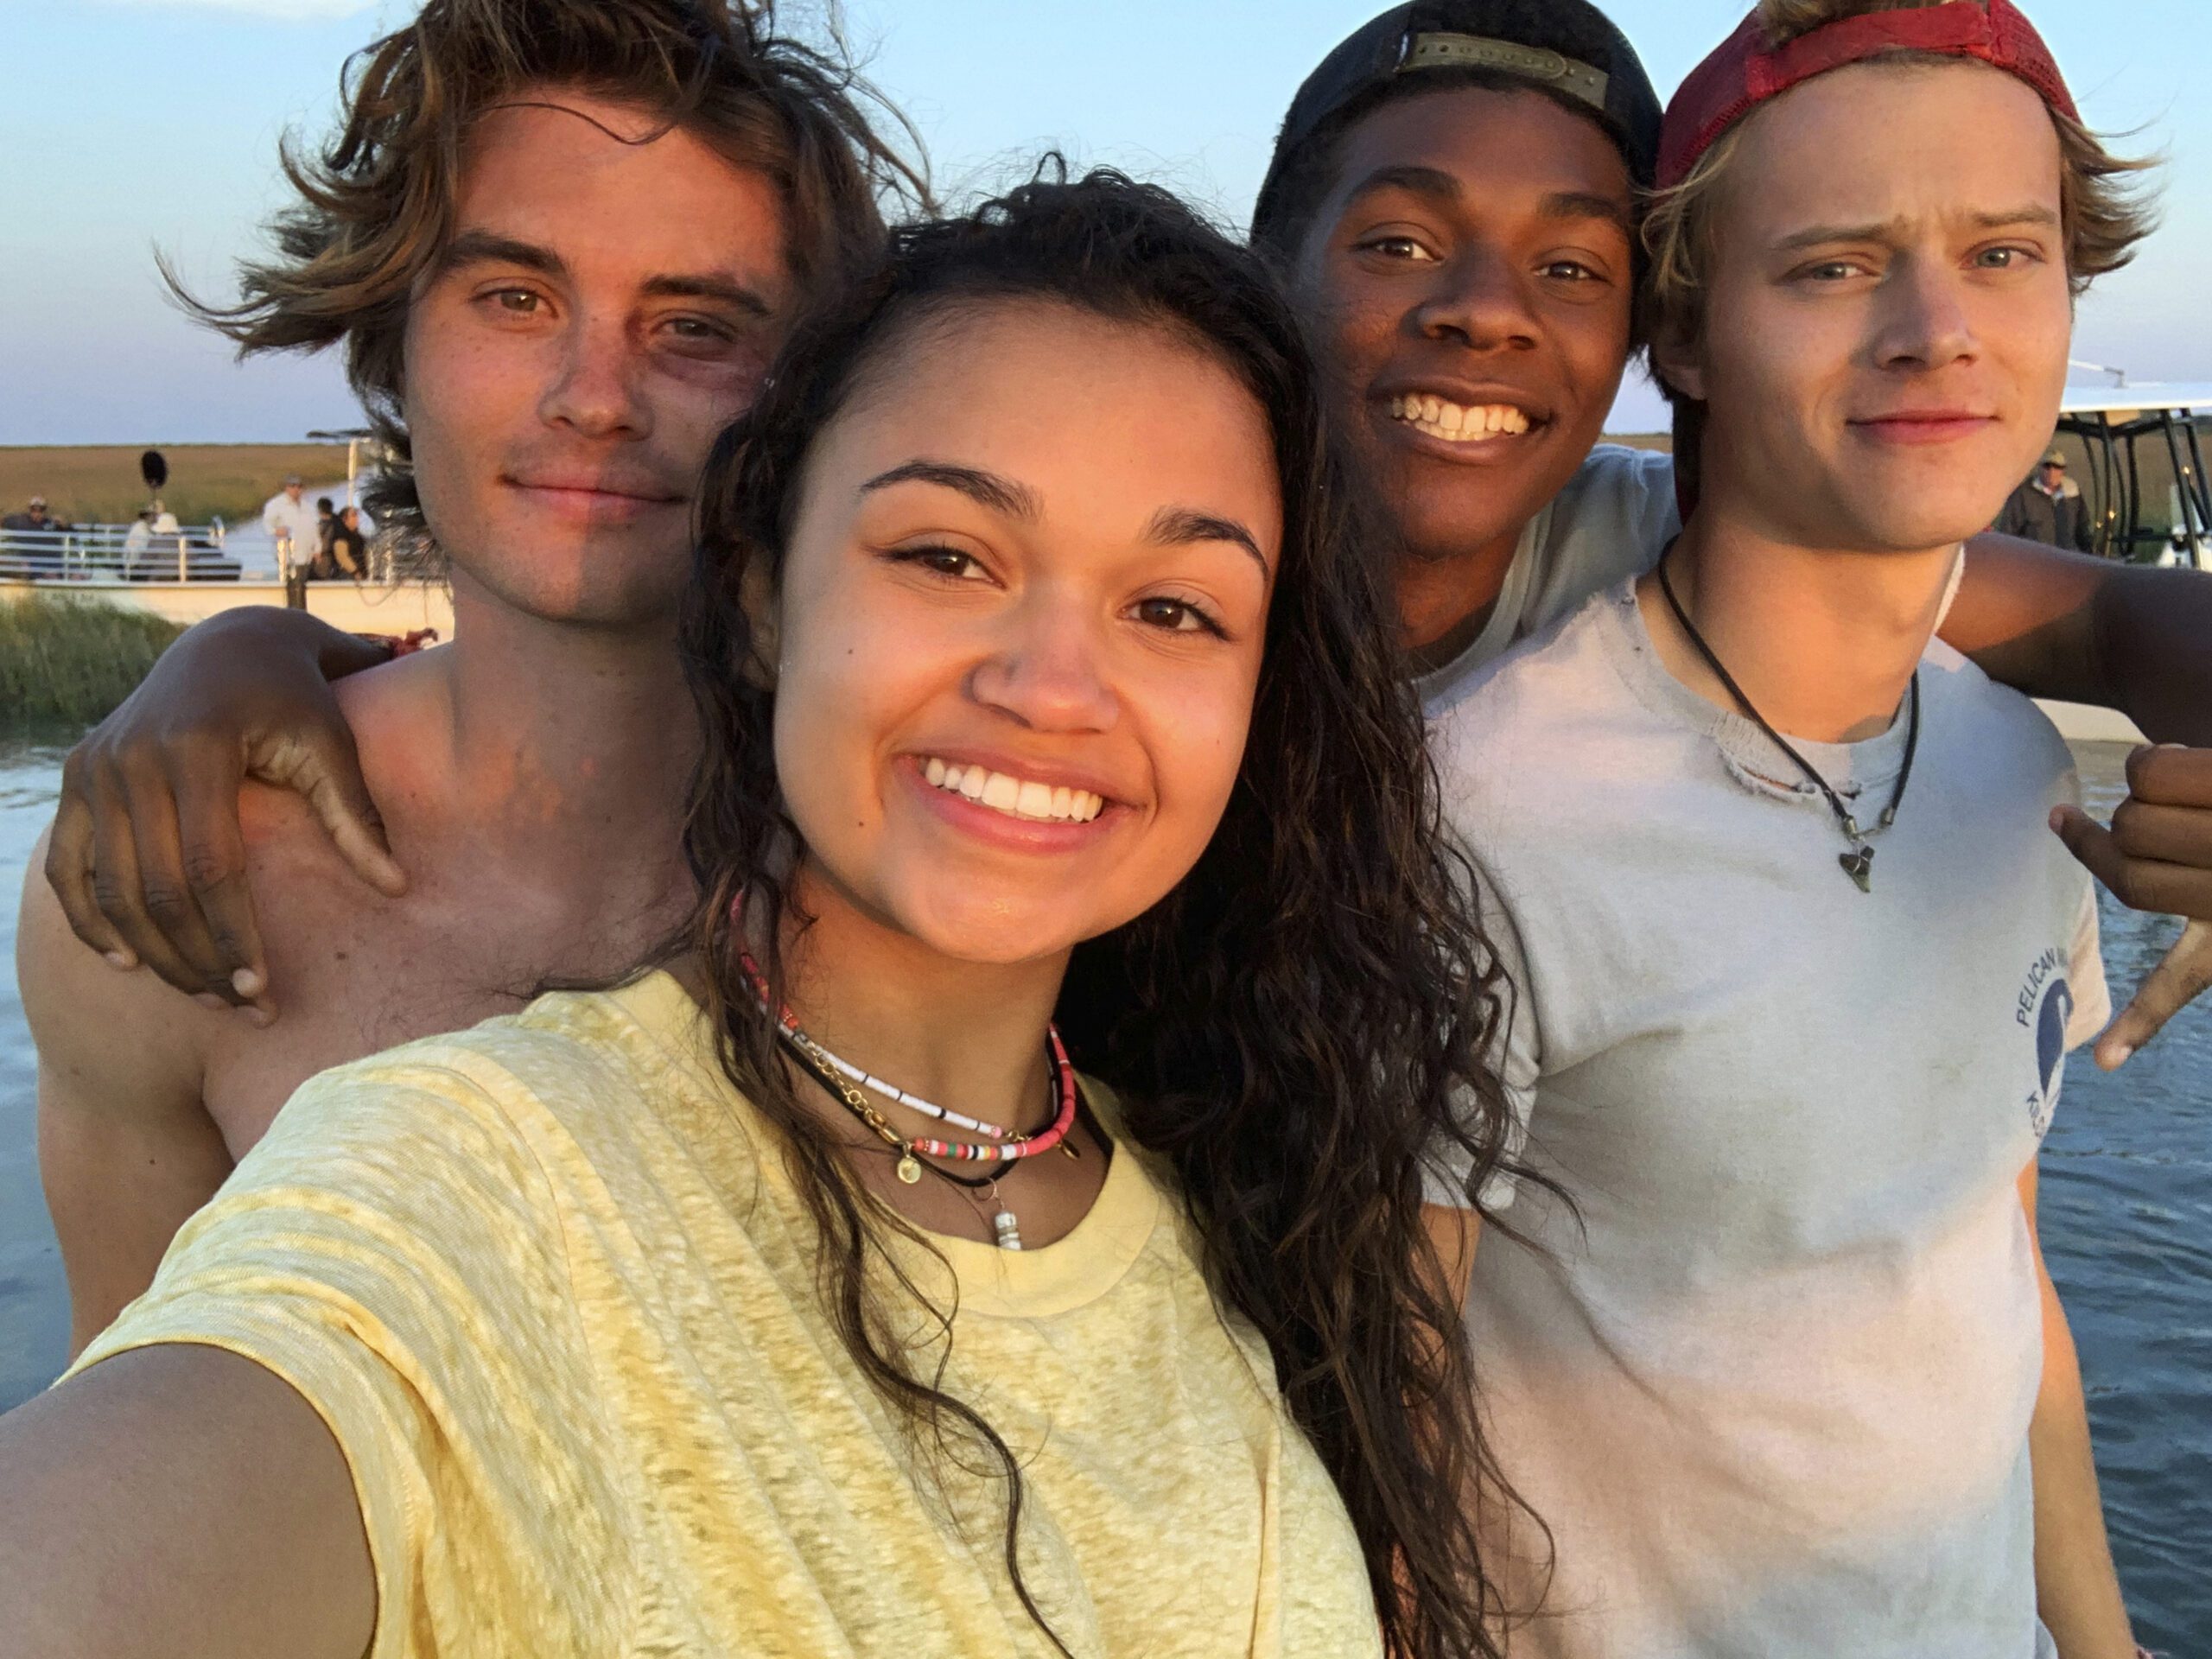 A group of young people on the beach, capturing a selfie in Outer Banks Season 2.